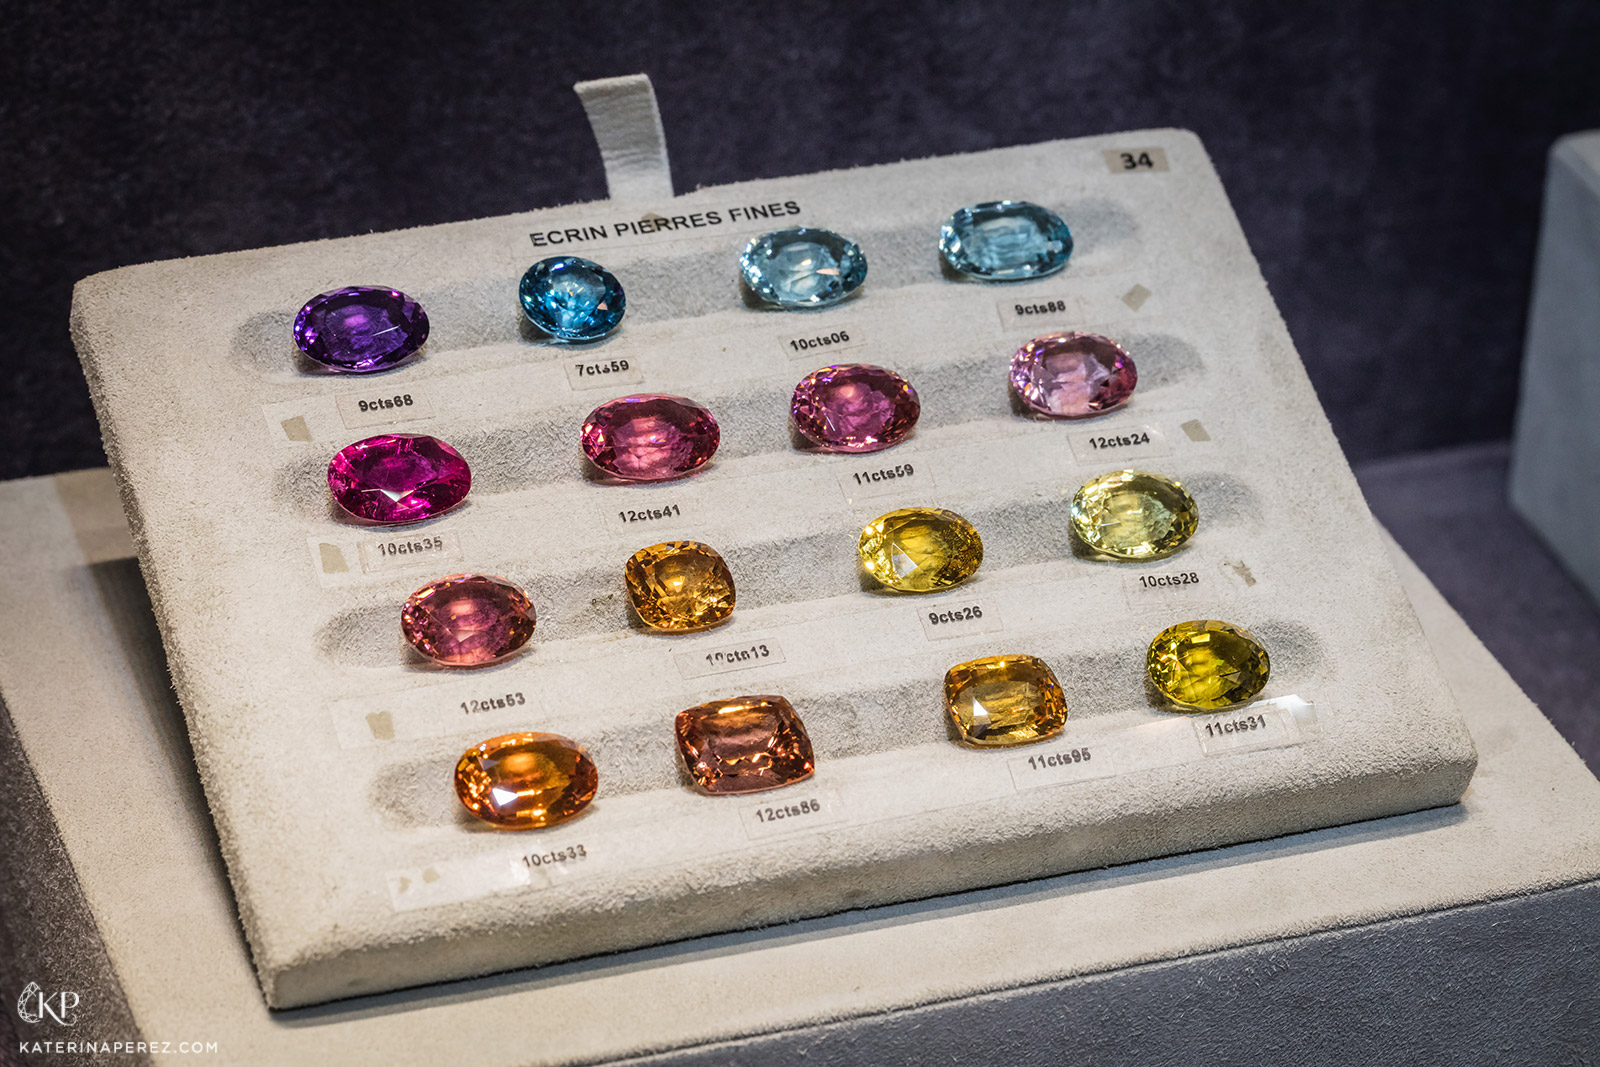 Marcel Poncet's selection of exceptional gemstones. Photo by Simon Martner